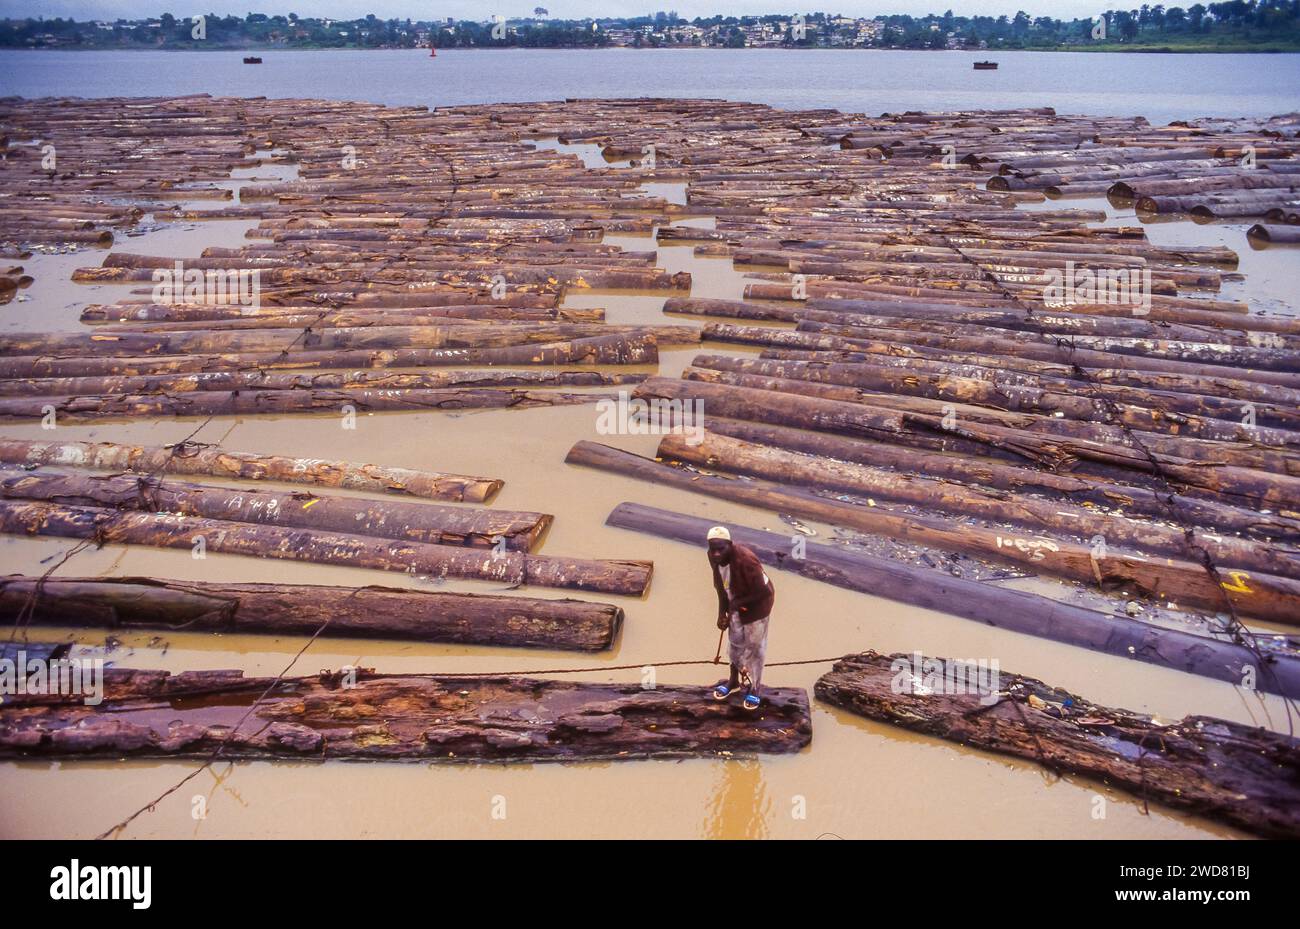 Ivory Coast, Abidjan; Logs of wood in the Banco Bay waiting for  transportation by ship.  A guard walks on the logs. Stock Photo